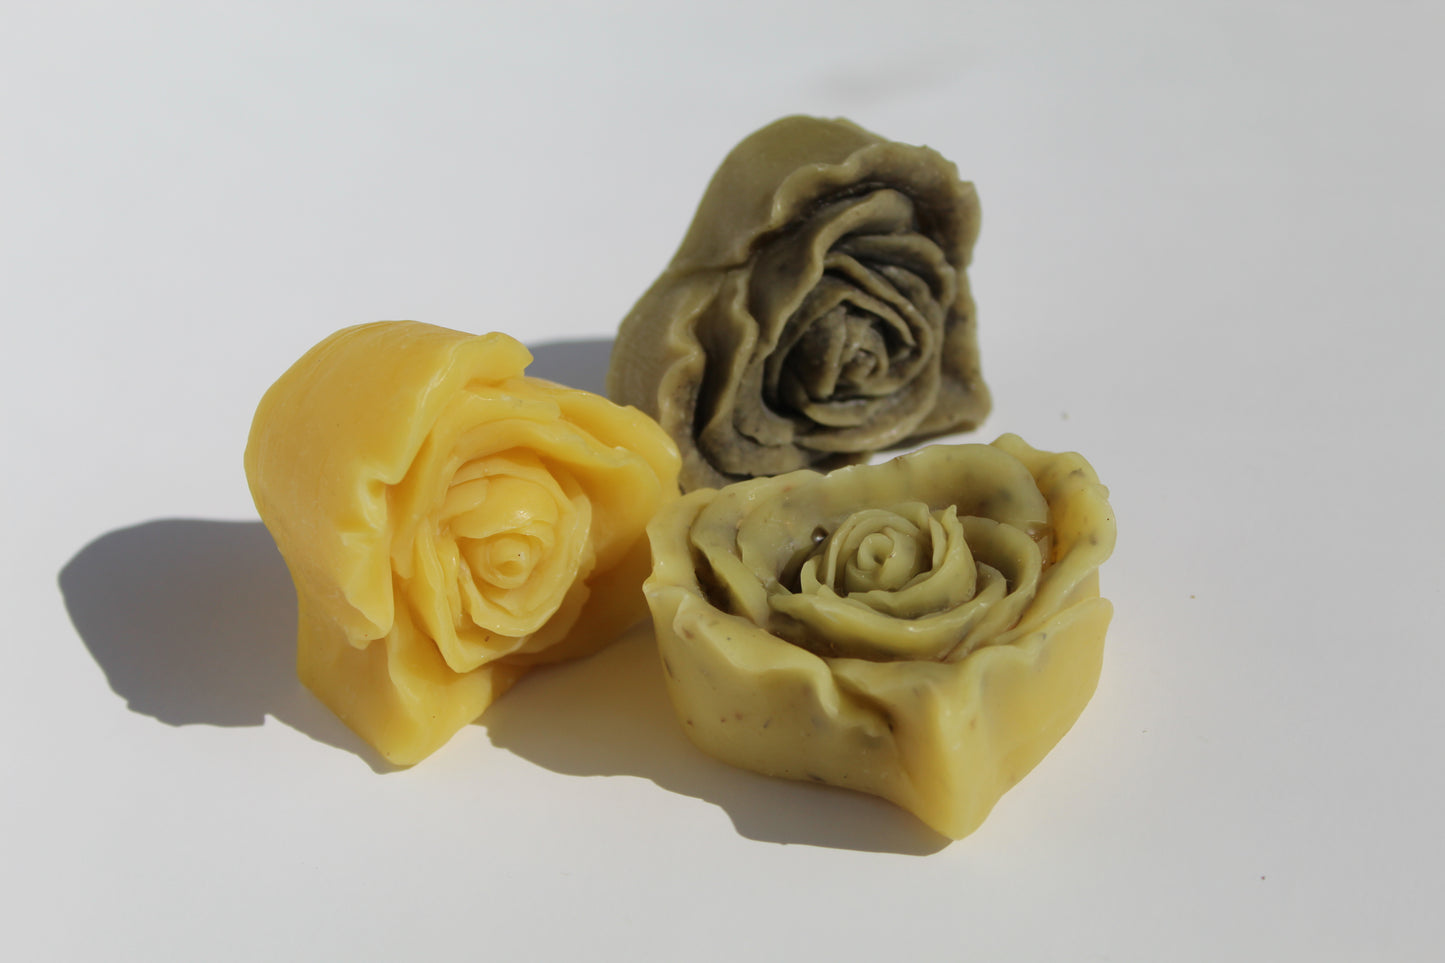 Large Beeswax Herb Melts